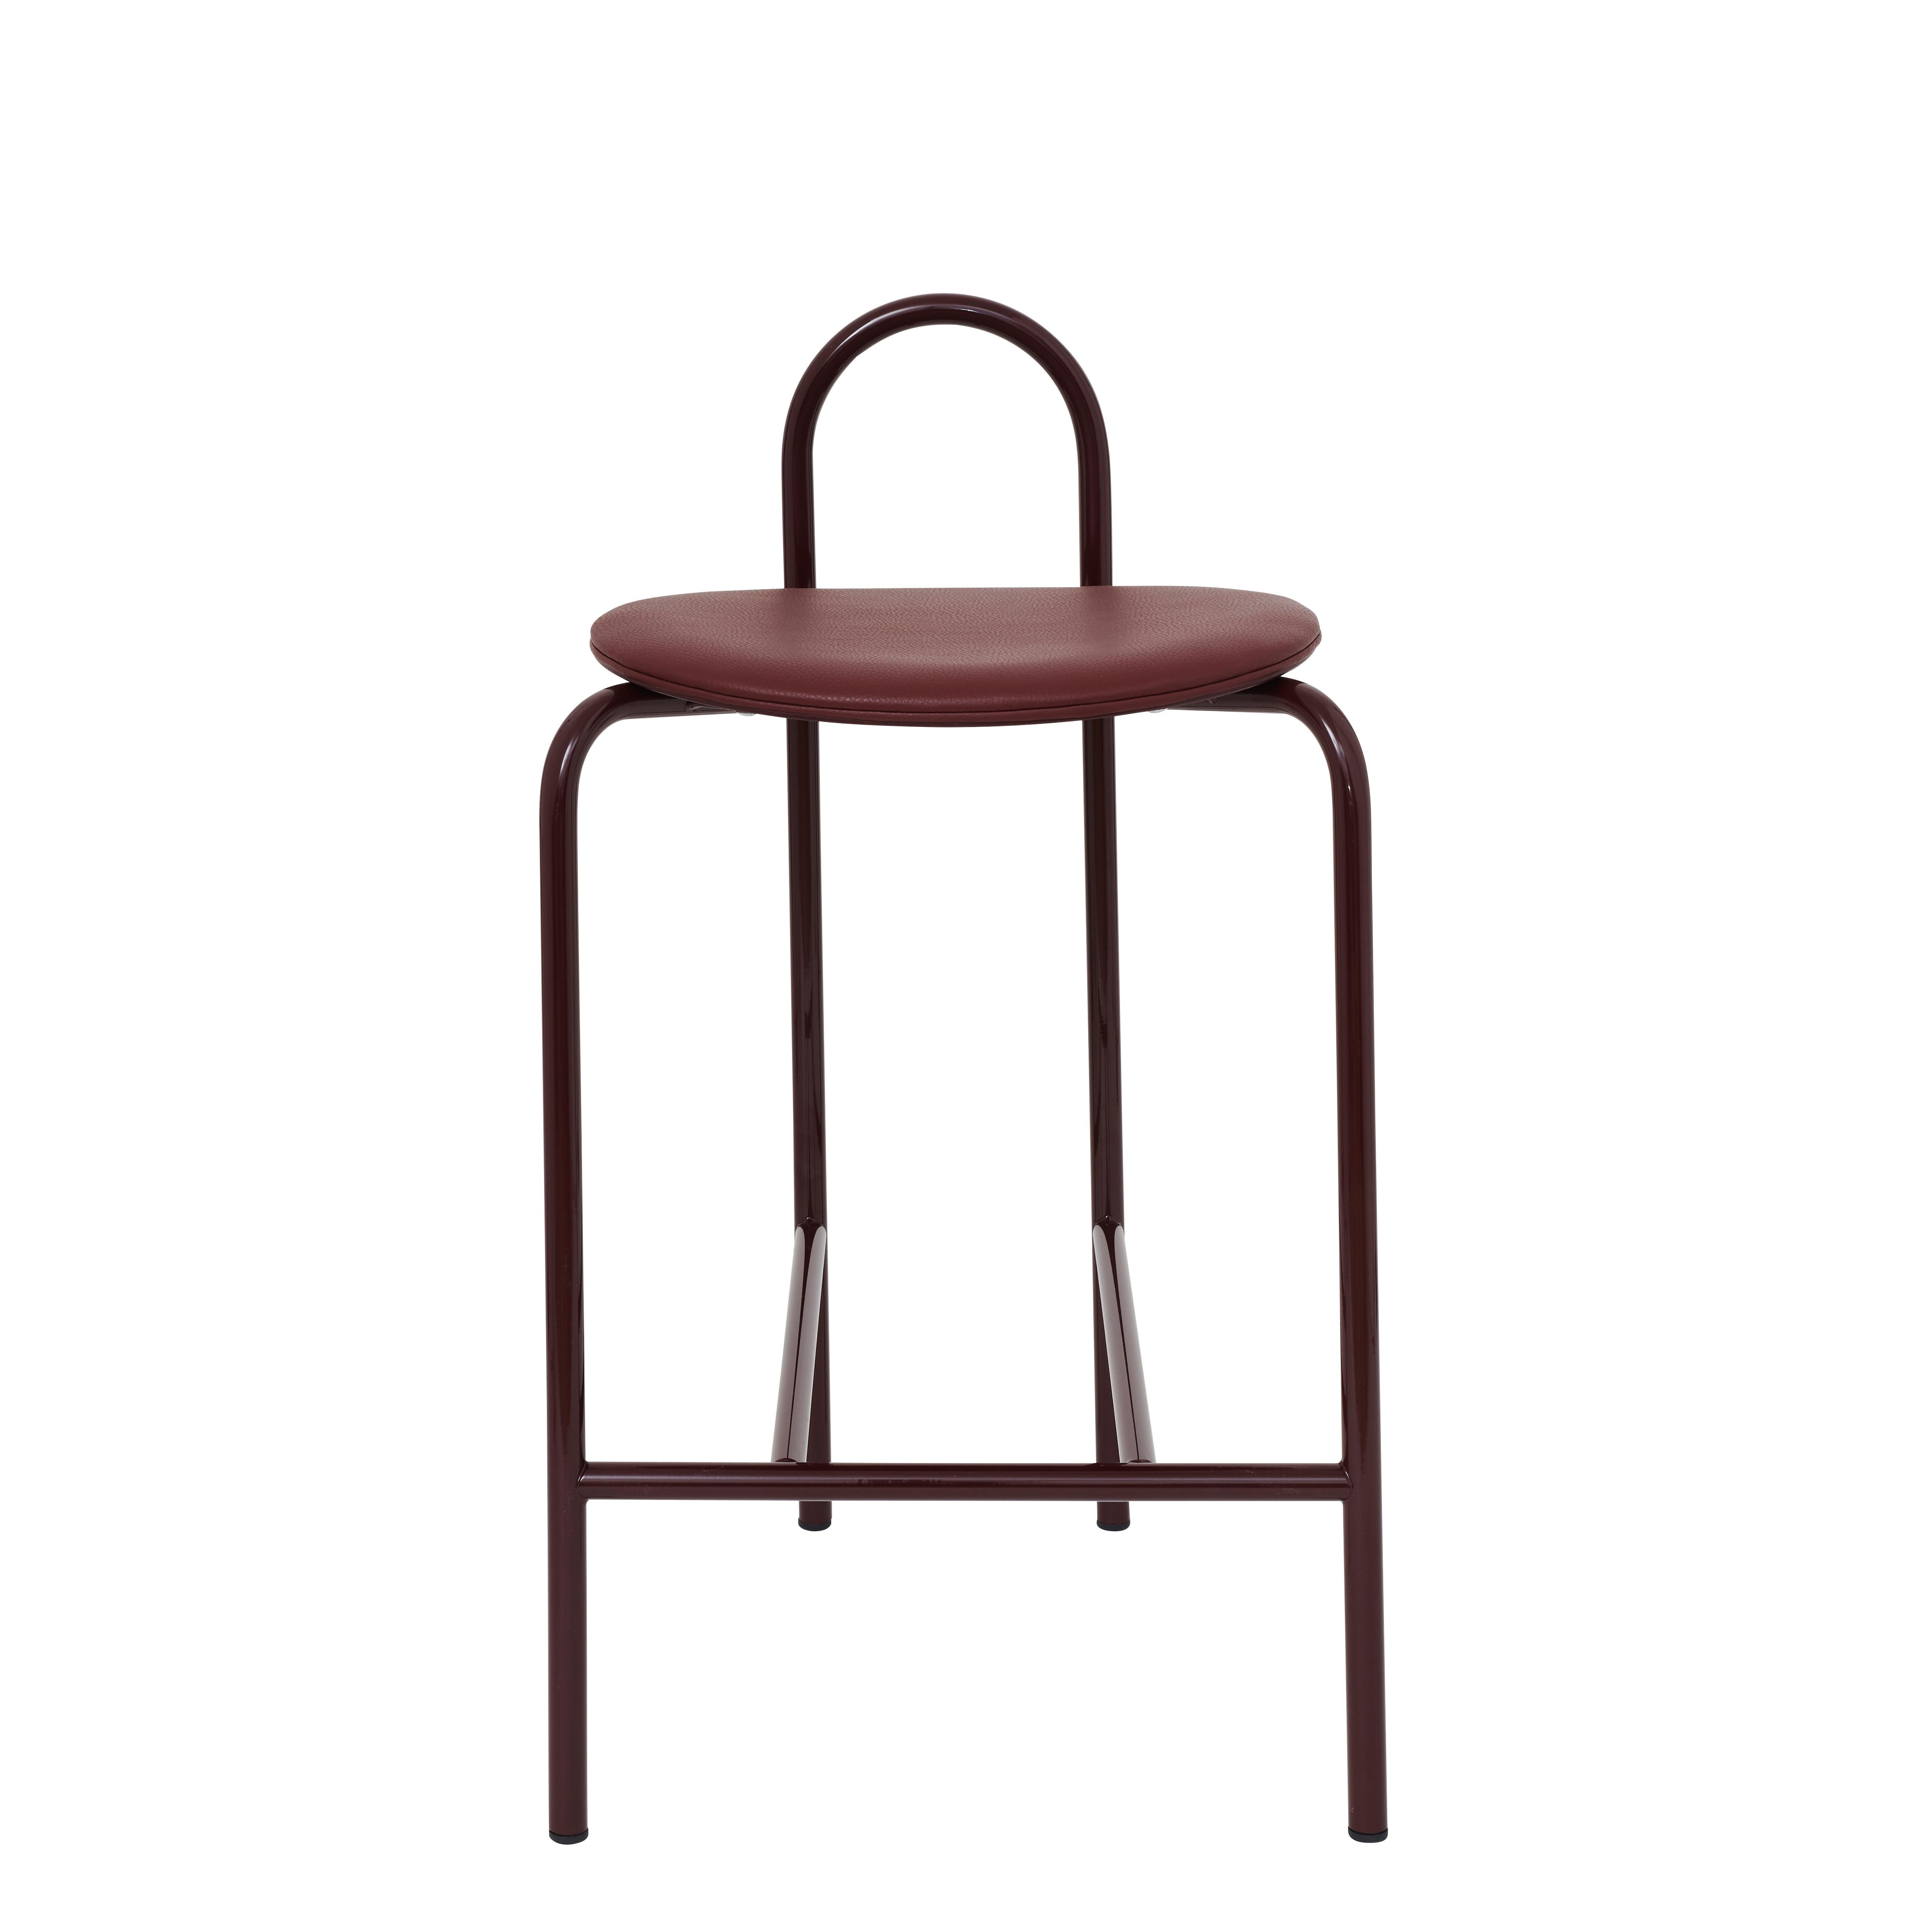 A natural extension to the popular Michelle chair, the Michelle stool continues to play on the visual application of the arc, creating a simple, striking and highly adaptable stool for any interior.

About this finishing:
Seat: Edinburgh Oxblood